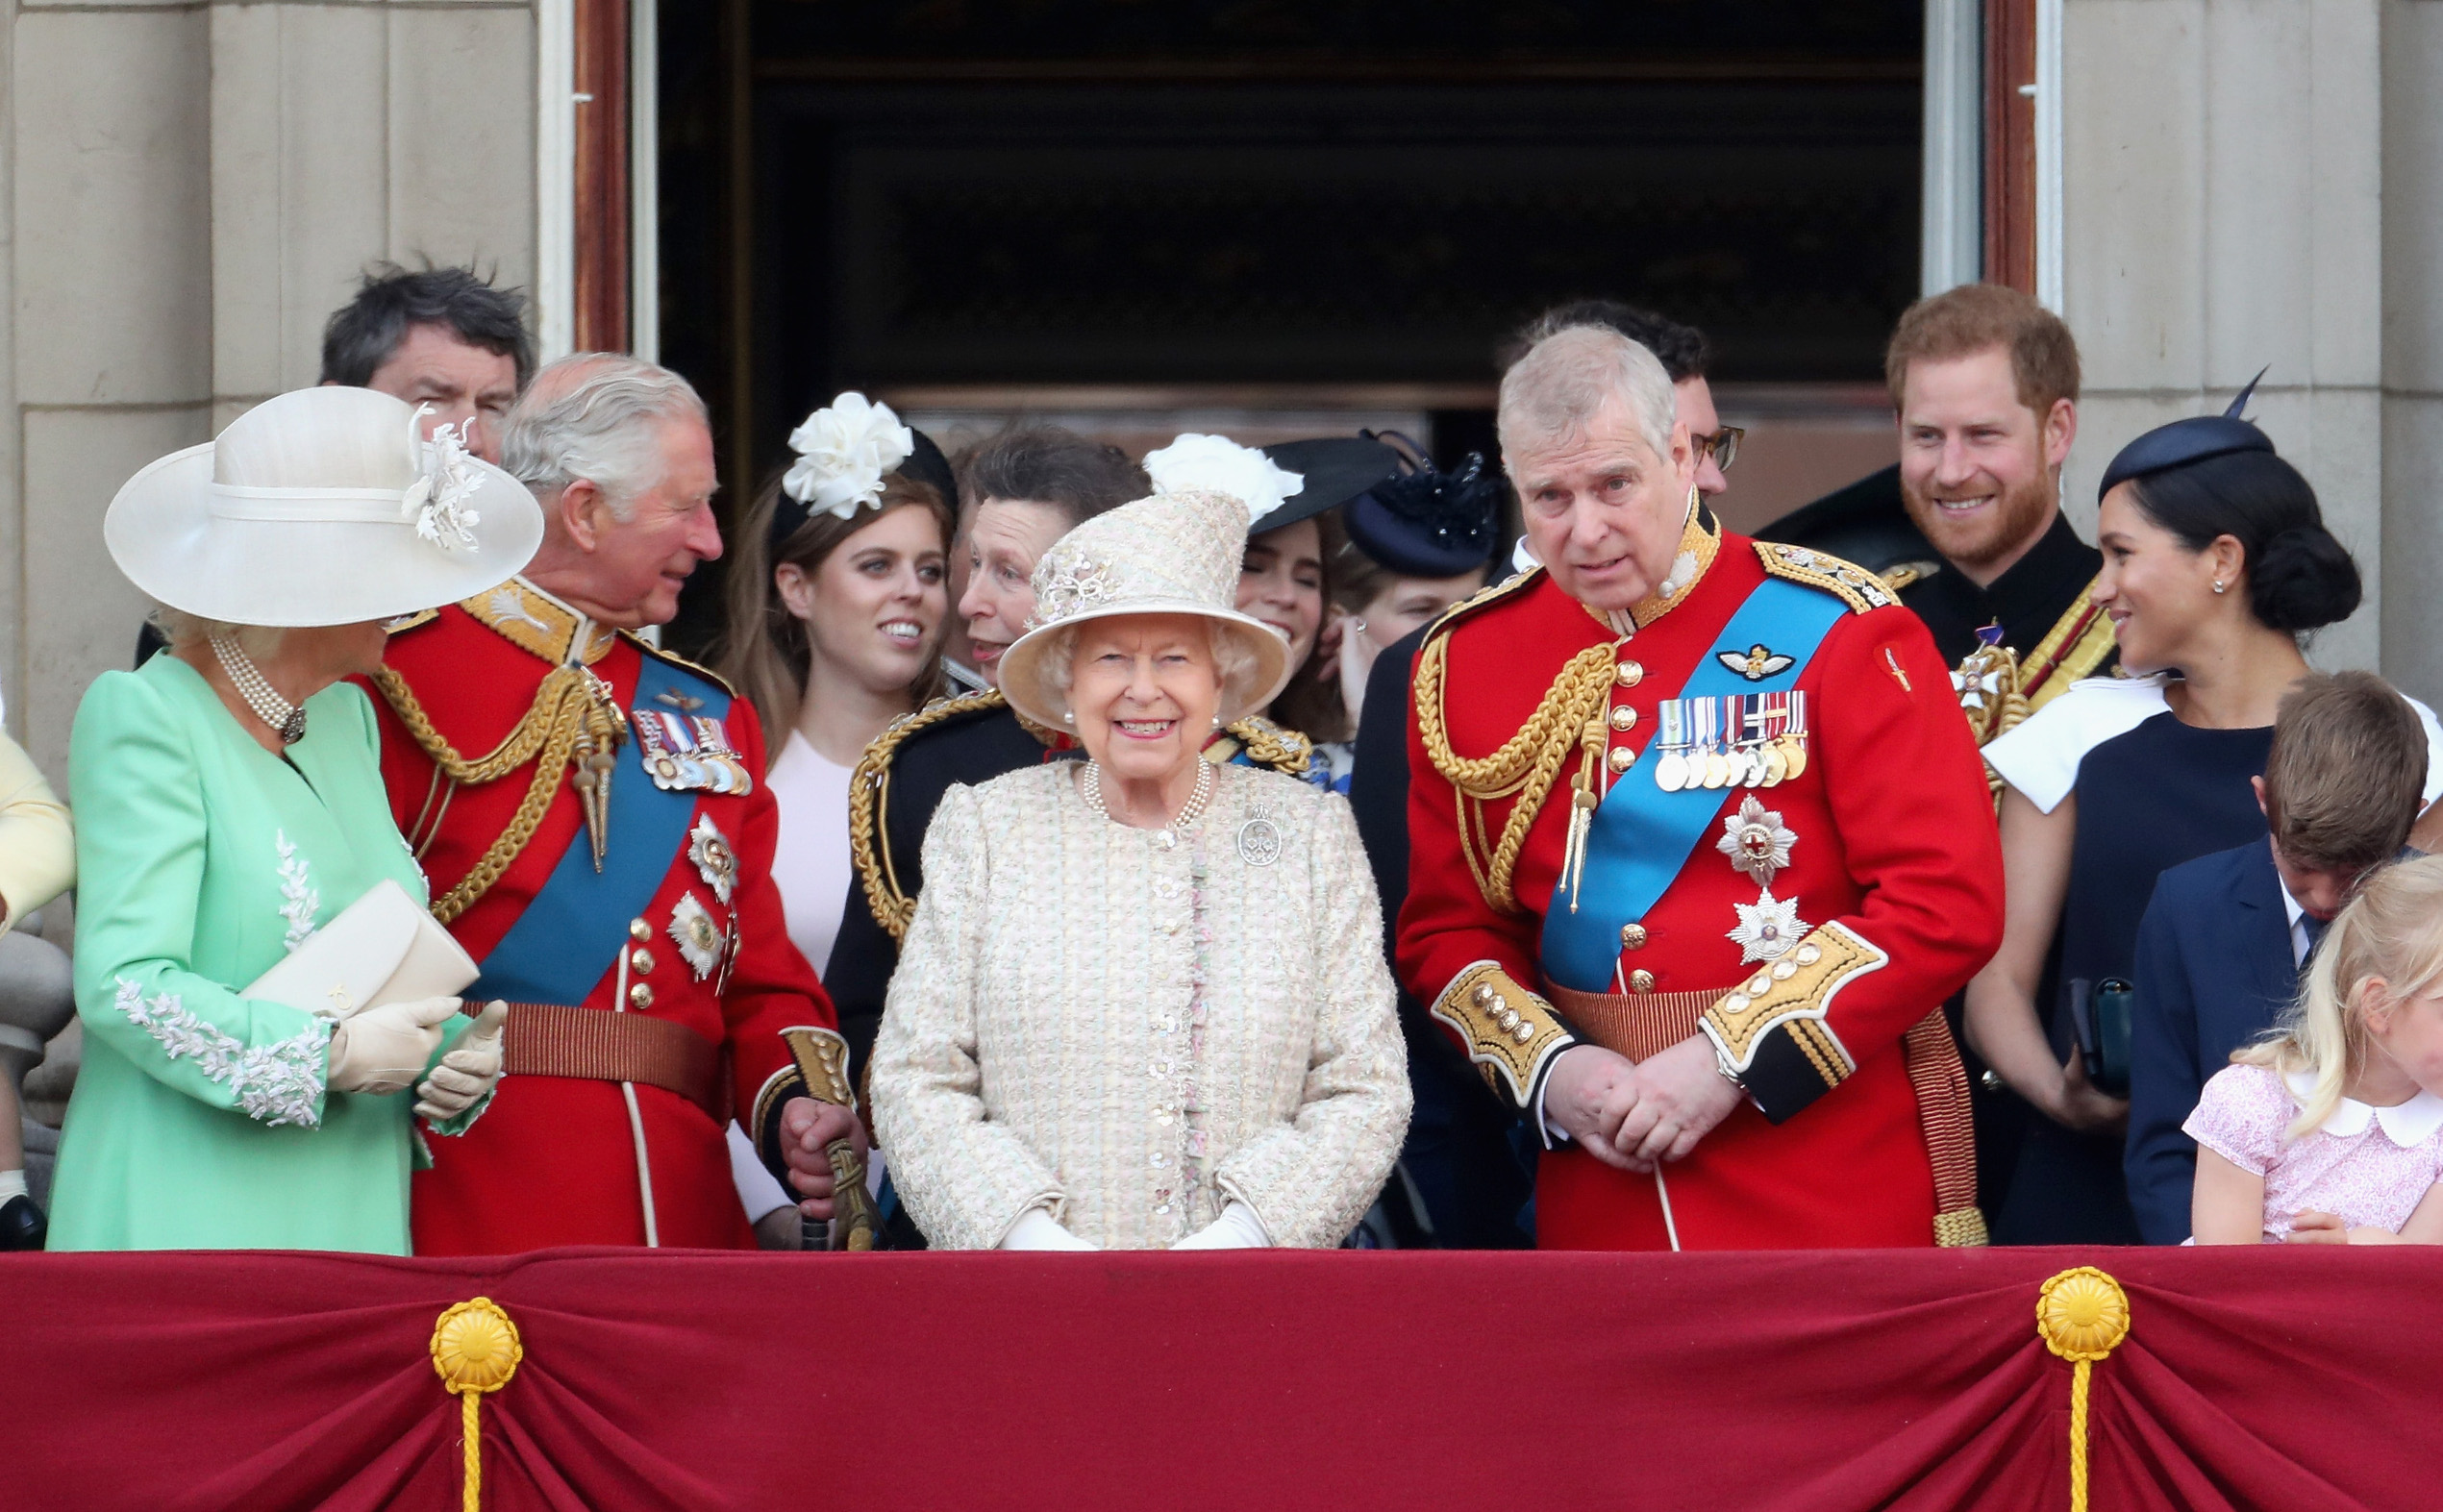 LONDON, ENGLAND - JUNE 08: (L-R) Camilla, Duchess of Cornwall Prince Charles, Prince of Wales, Queen Elizabeth II, Prince Andrew, Duke of York, Prince Harry, Duke of Sussex and Meghan, Duchess of Sussex during Trooping The Colour, the Queen's annual birthday parade, on June 8, 2019 in London, England.  (Photo by Chris Jackson/Getty Images)